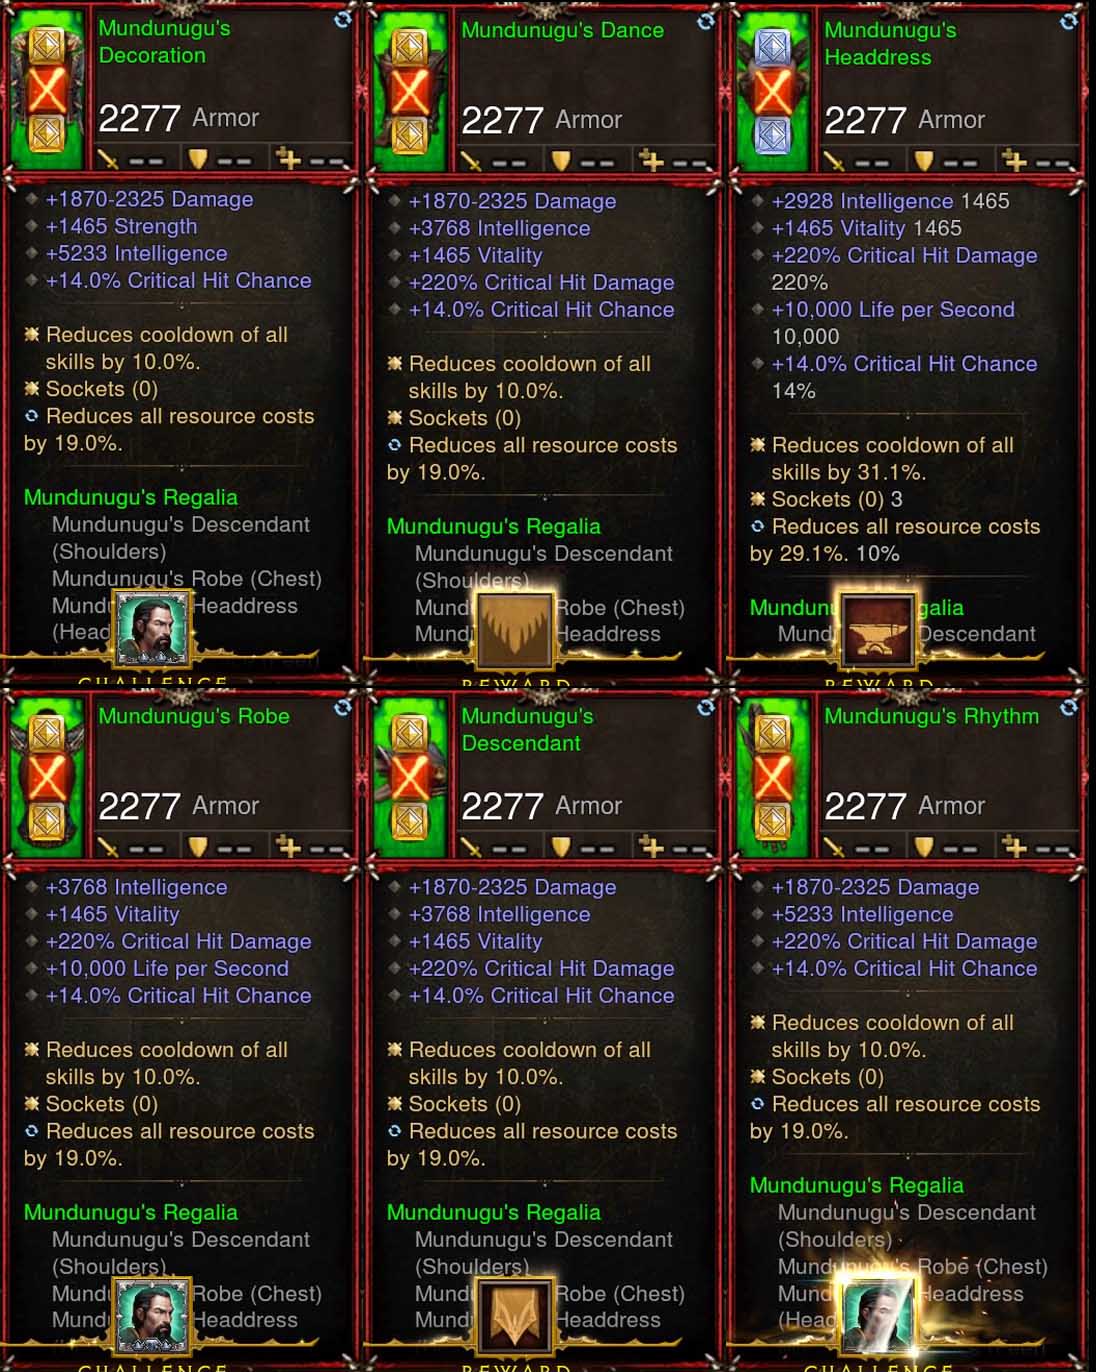 [Primal Ancient] 6x Piece Patch 2.6.8 Mundunugu Witch Doctor Set Diablo 3 Mods ROS Seasonal and Non Seasonal Save Mod - Modded Items and Gear - Hacks - Cheats - Trainers for Playstation 4 - Playstation 5 - Nintendo Switch - Xbox One